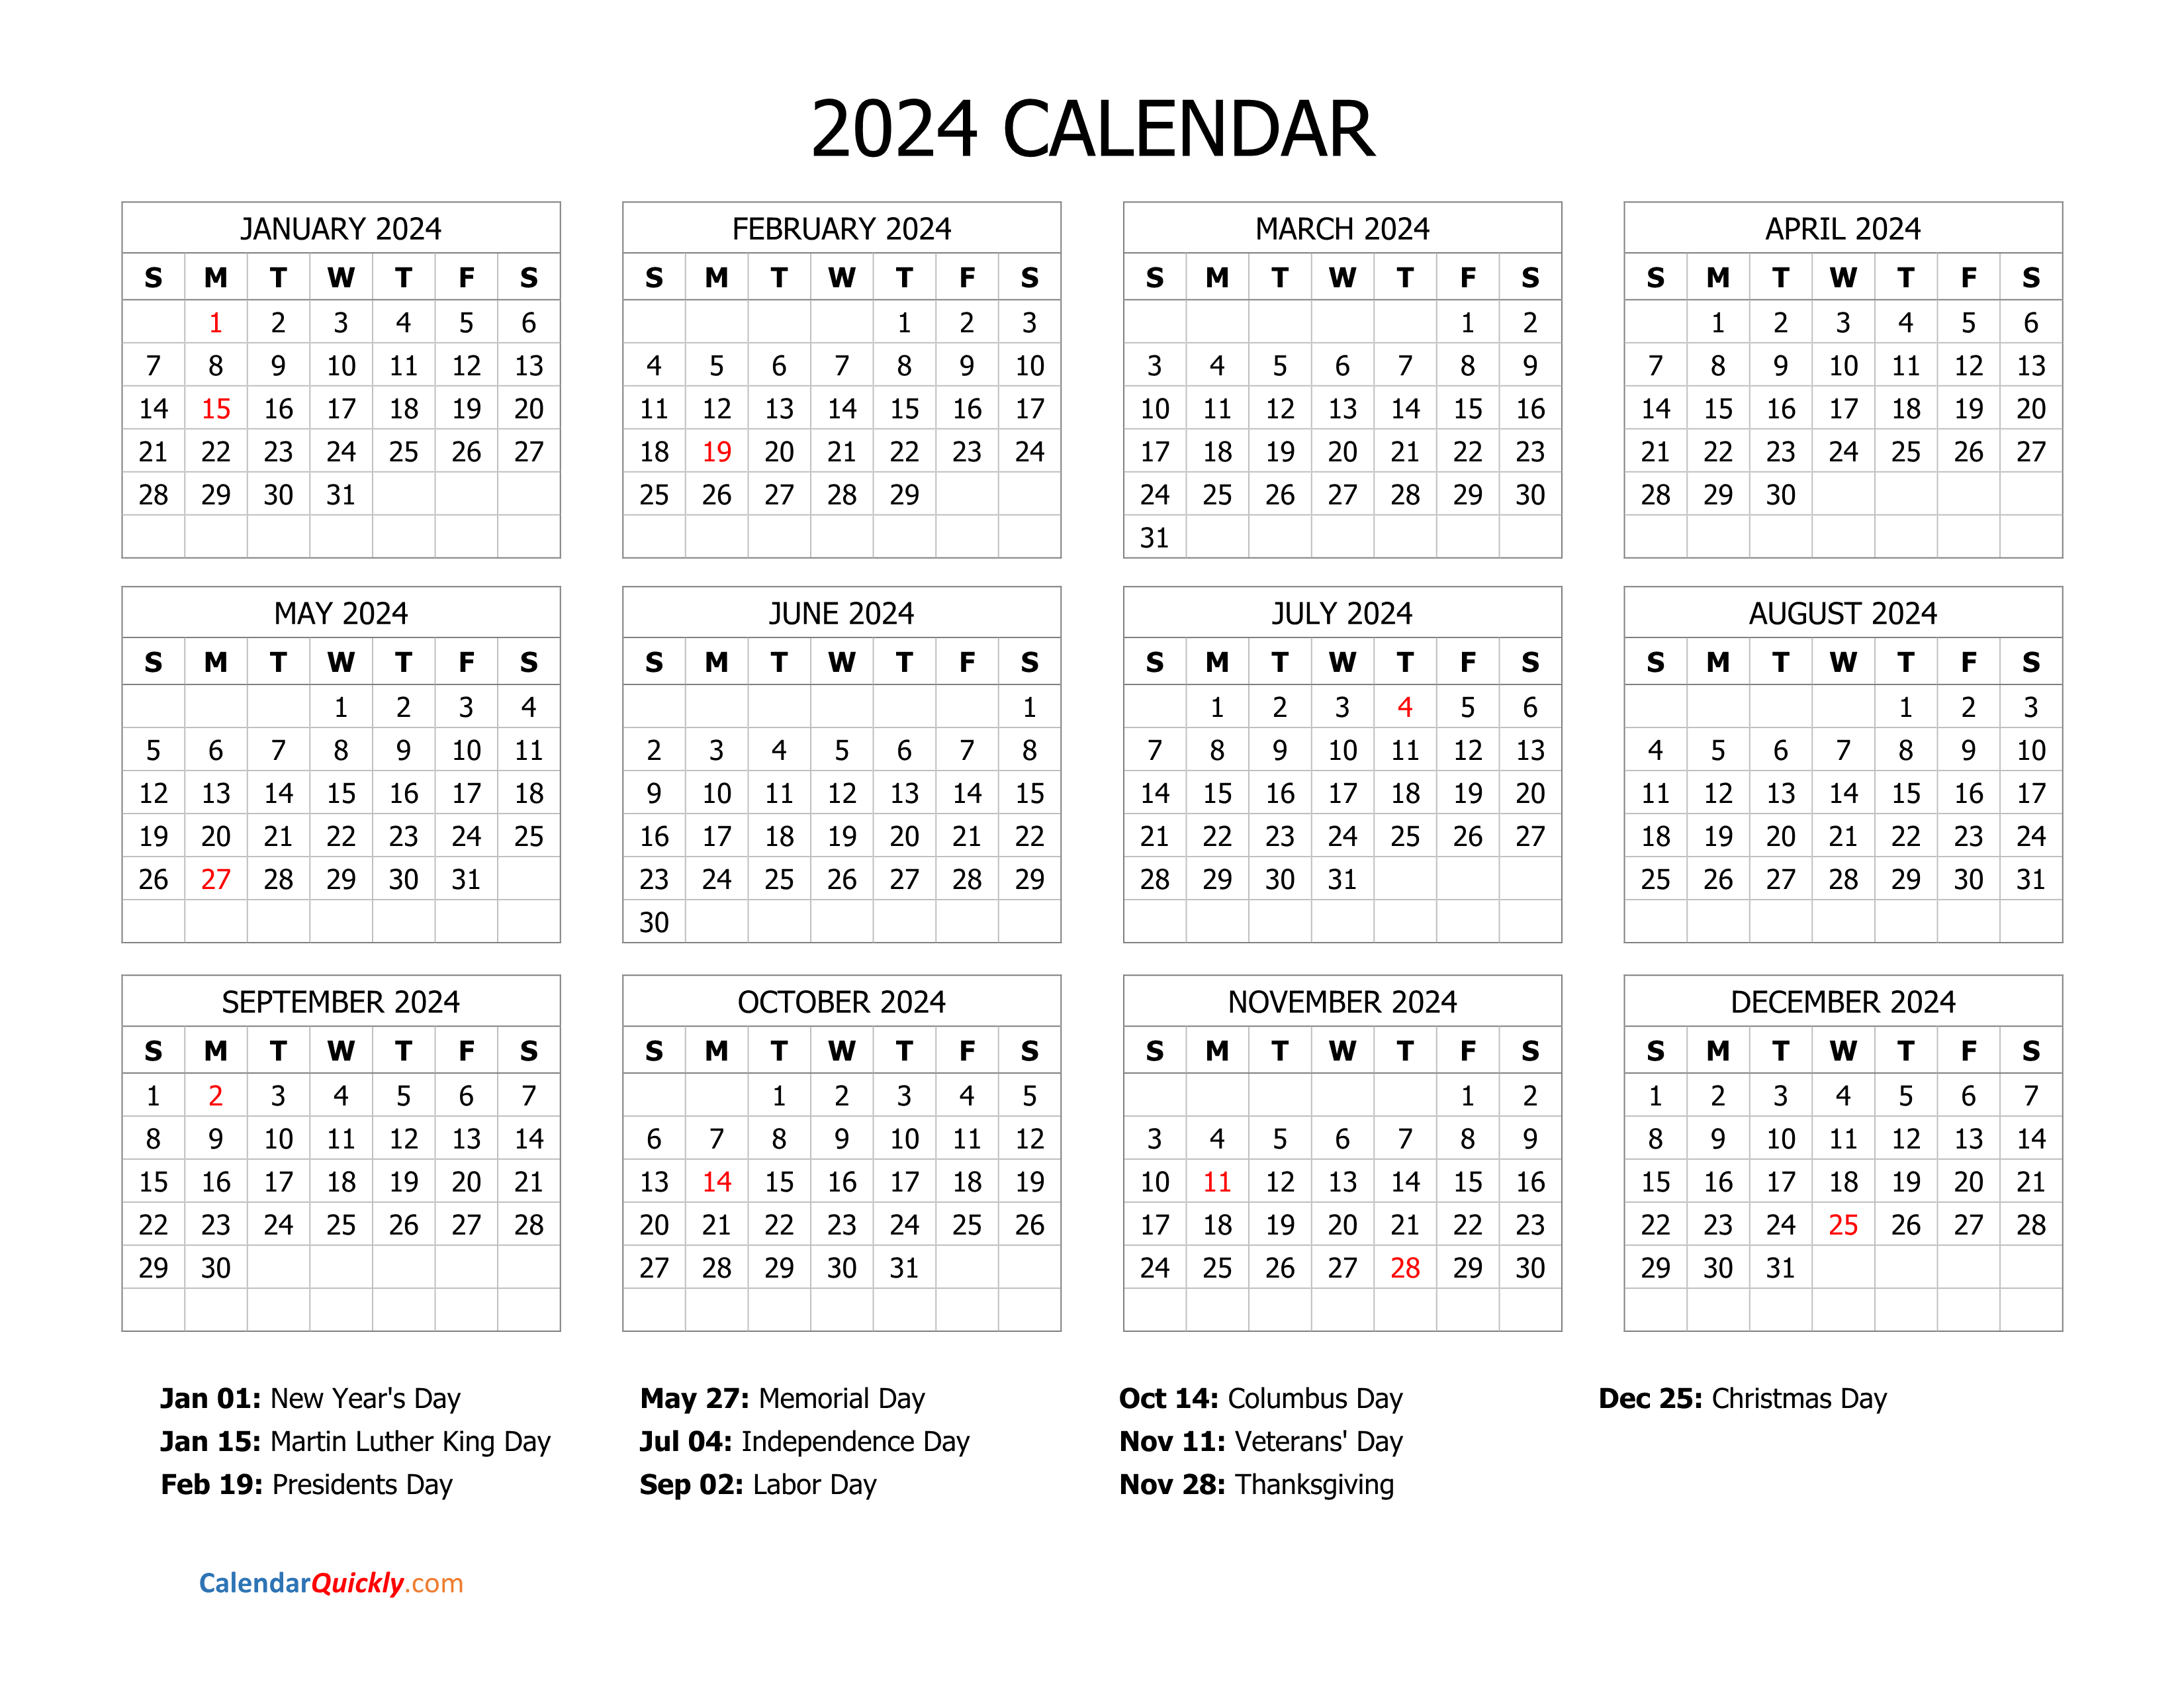 2024 Calendar Free Printable - Free Printable 2024 Calendar With Holidays & Moon Phases